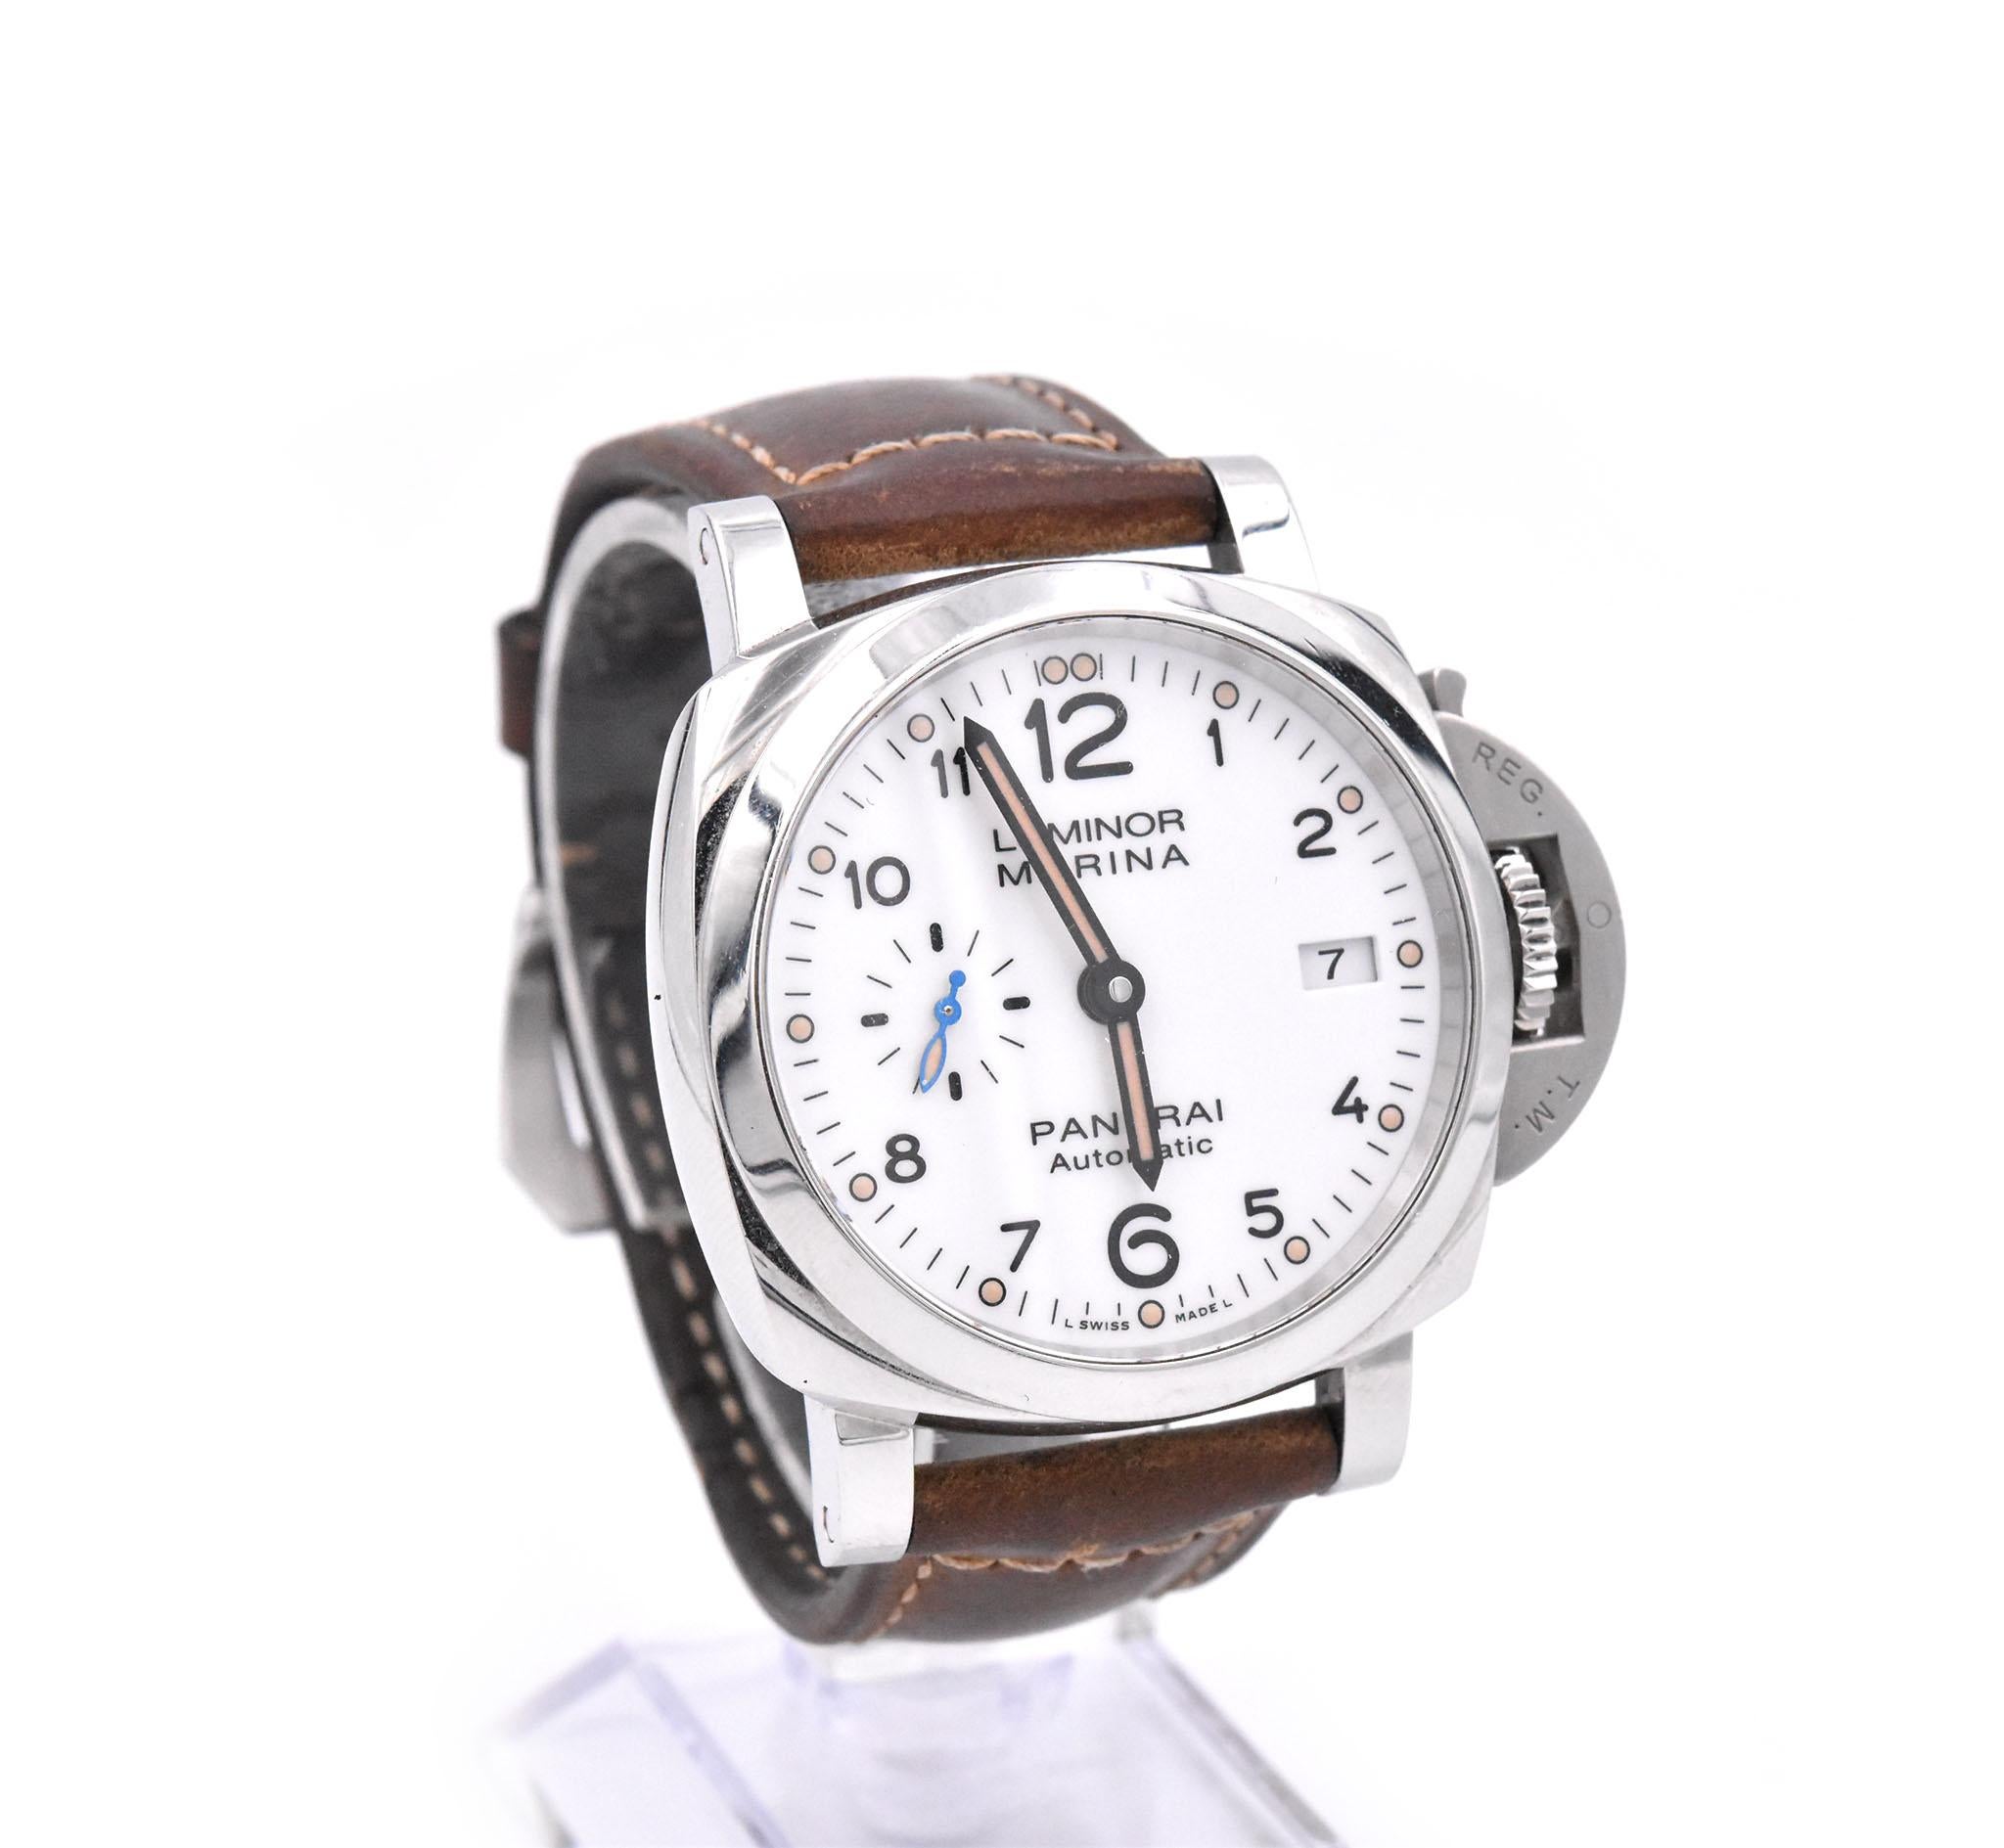 Movement: manual wind movement
Function: hours, minutes, small seconds, and date
Case: 42mm stainless steel case, sapphire crystal, smooth bezel, push-pull crown
Band: factory brown leather standard Panerai strap
Dial: white dial, luminescent brown